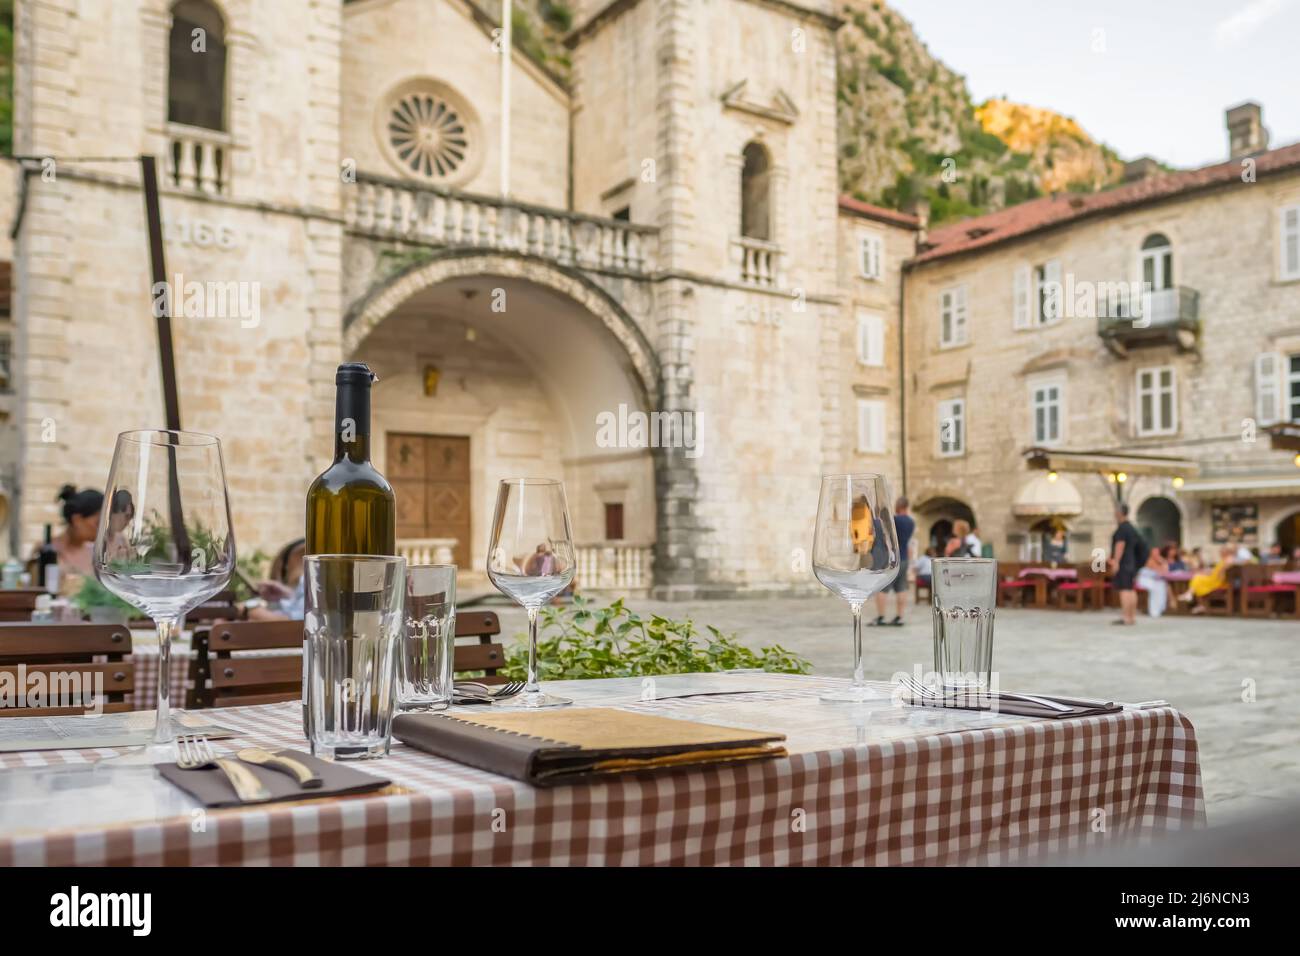 Outdoor street cafe in Kotor old town square in Montenegro Stock Photo